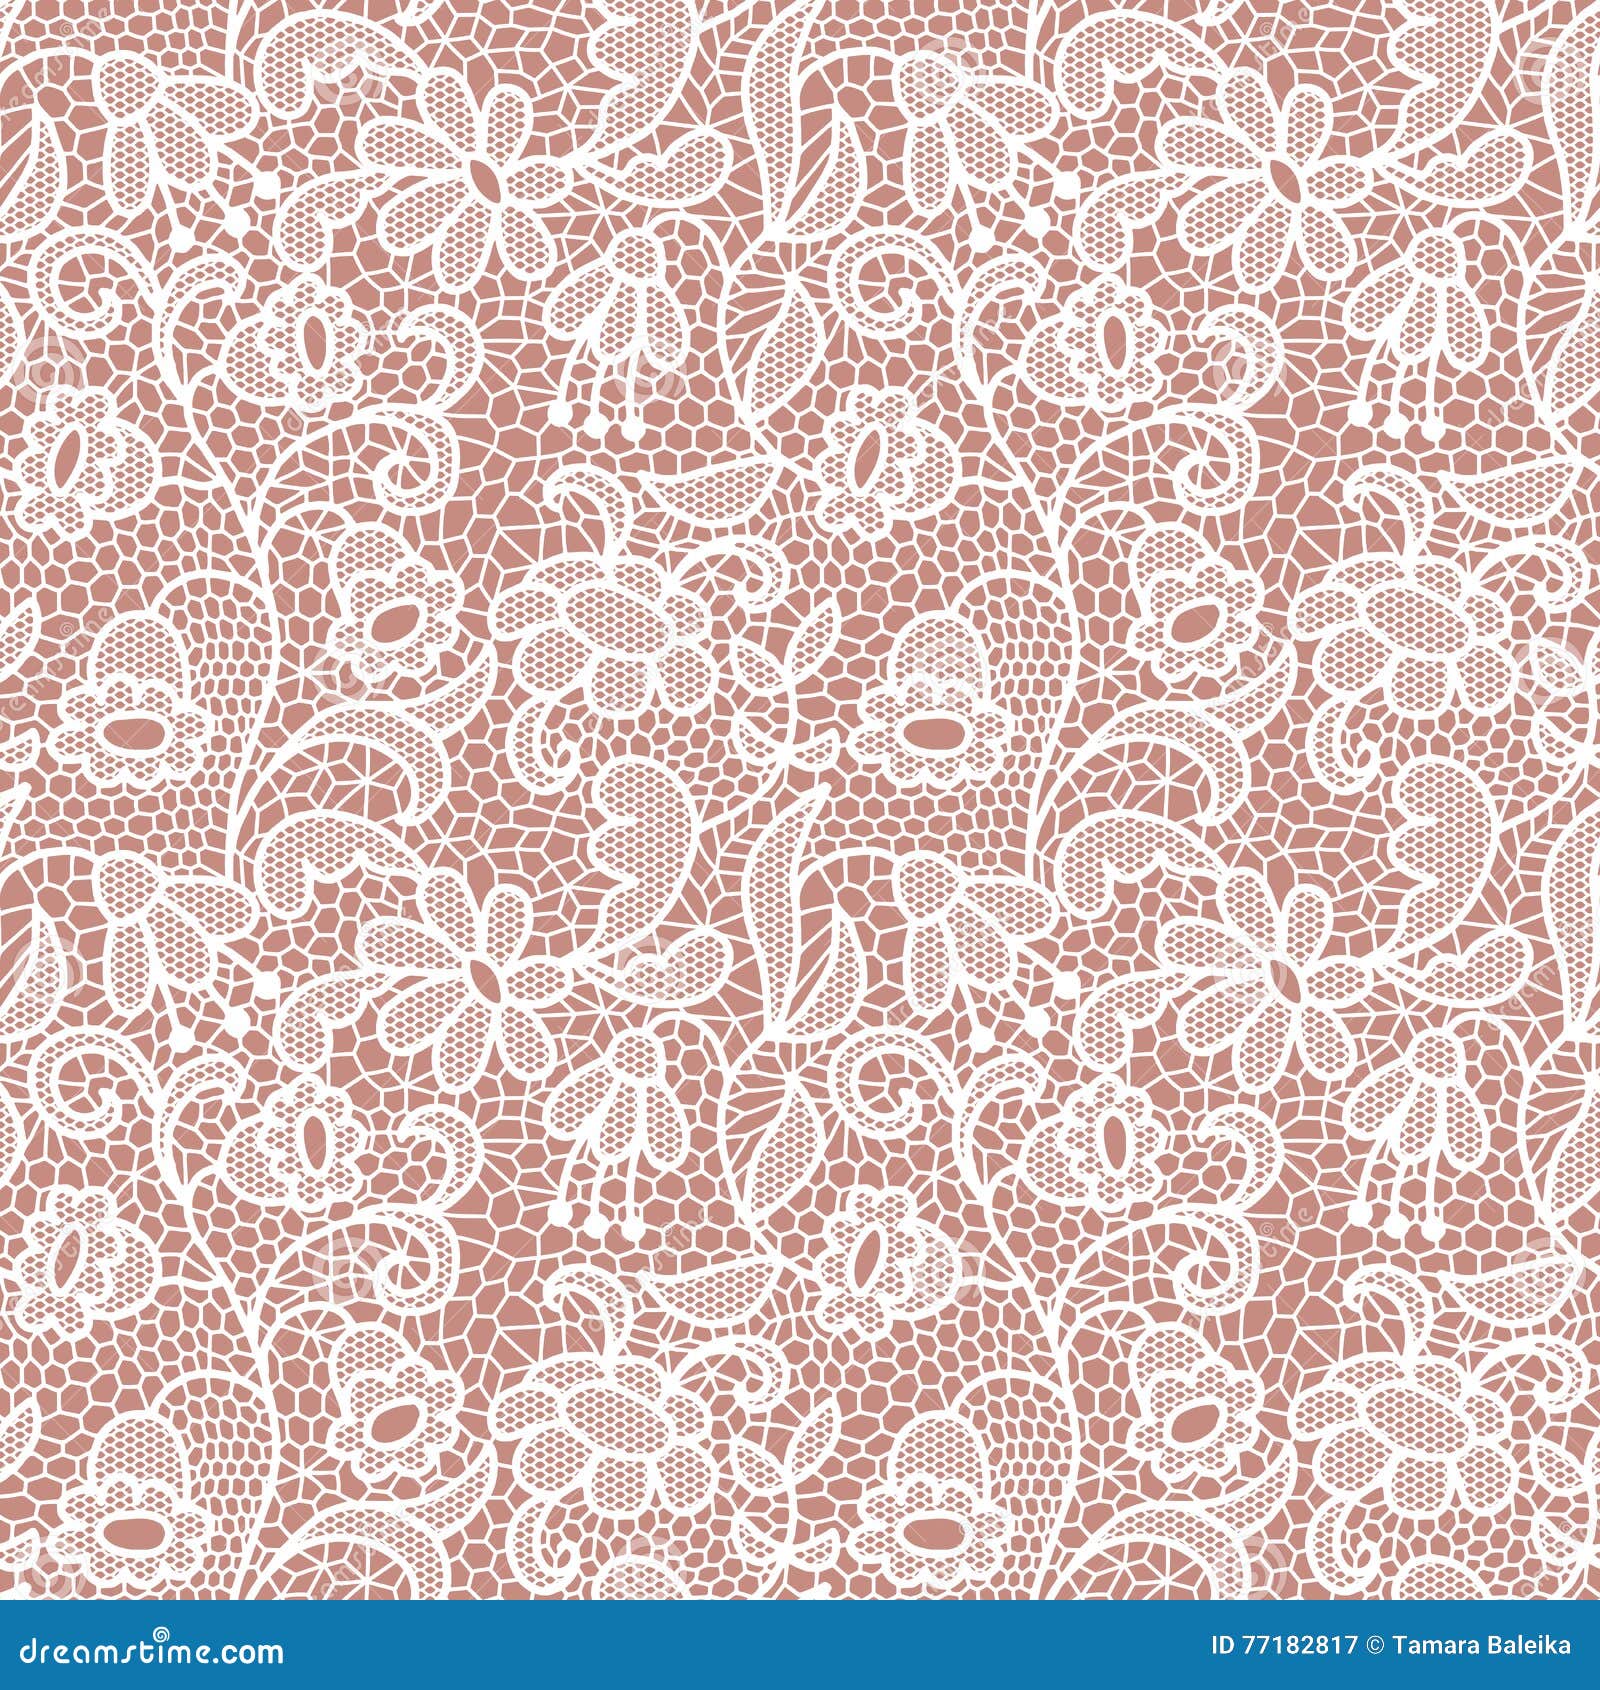 Lace Seamless Pattern with Flowers Stock Vector - Illustration of ...